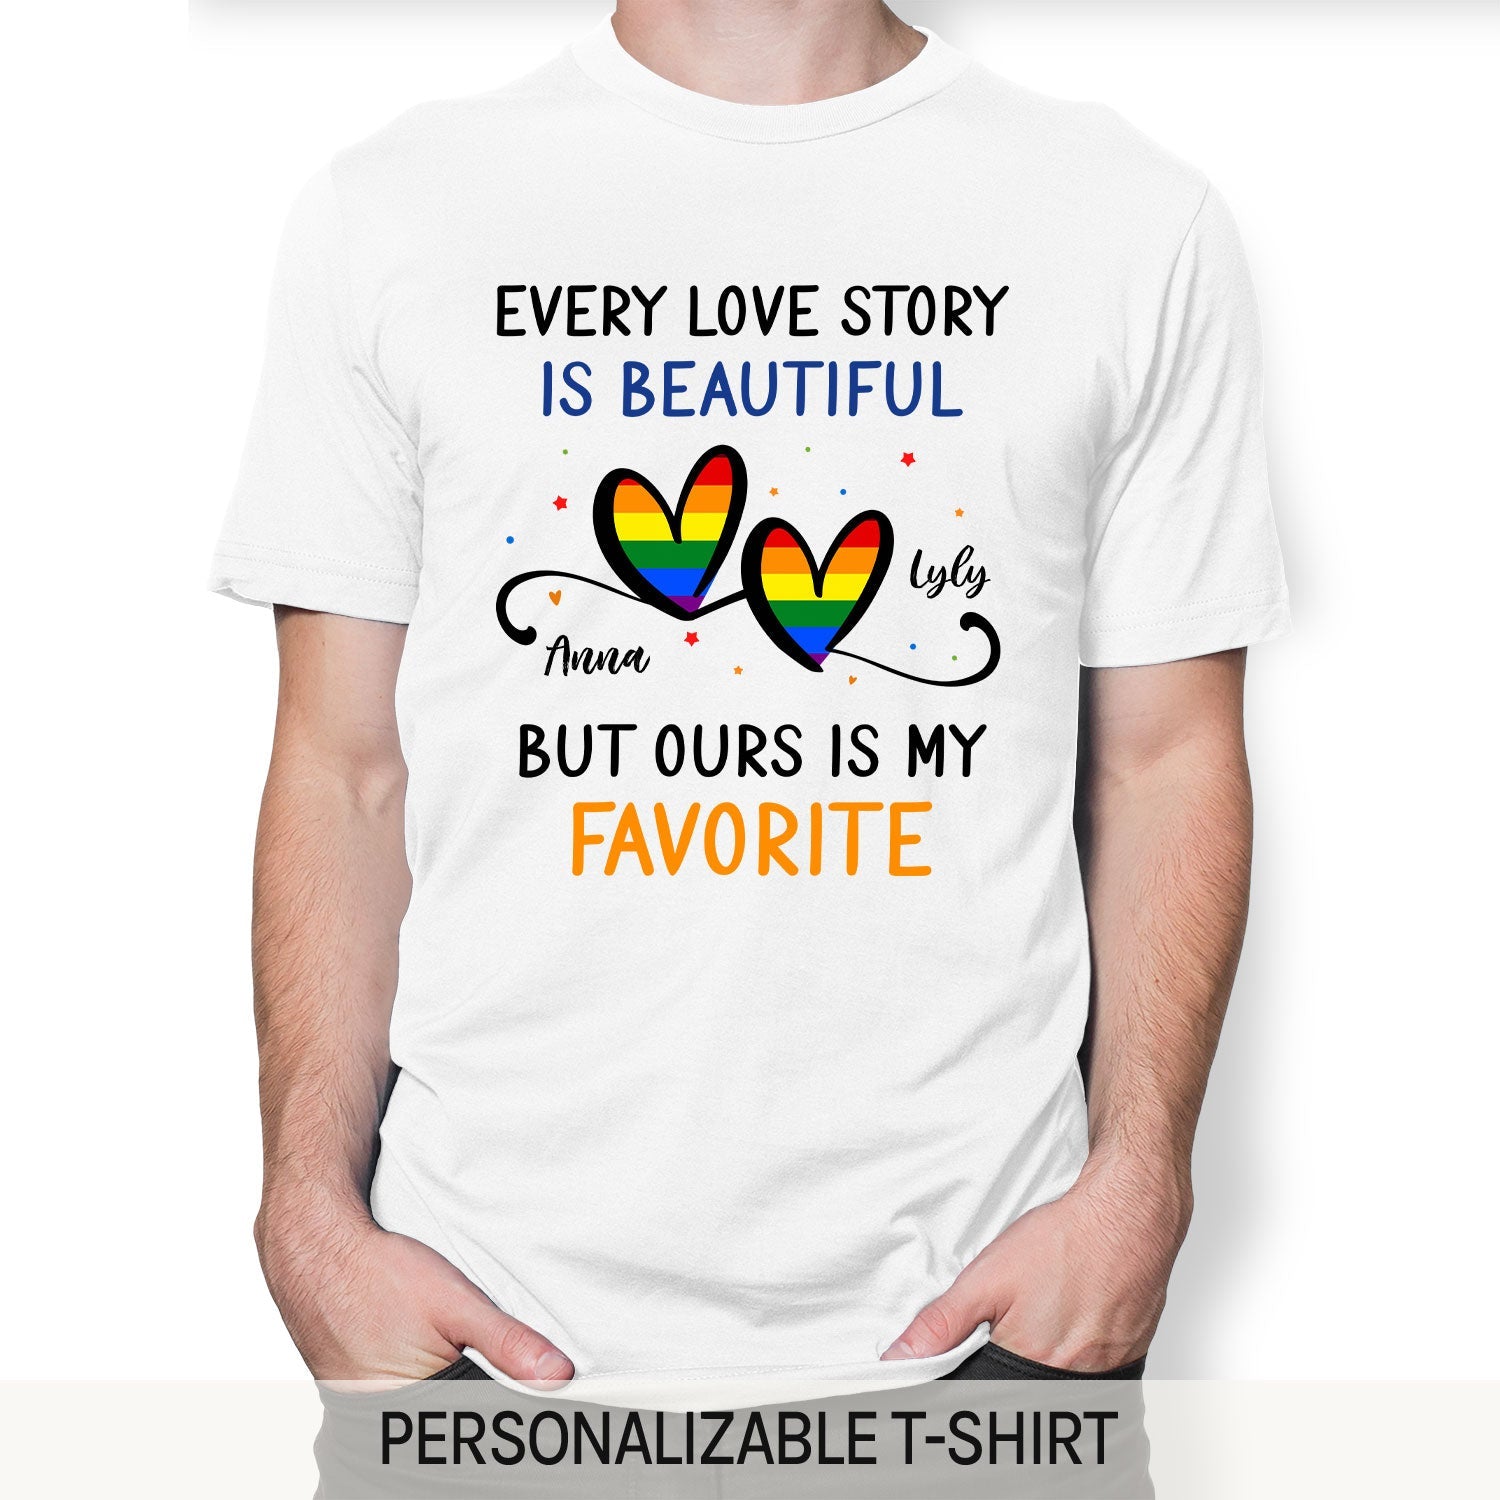 Every Love Story Is Beautiful - Personalized Anniversary or Valentine's Day gift for LGBT couple - Custom Tshirt - MyMindfulGifts